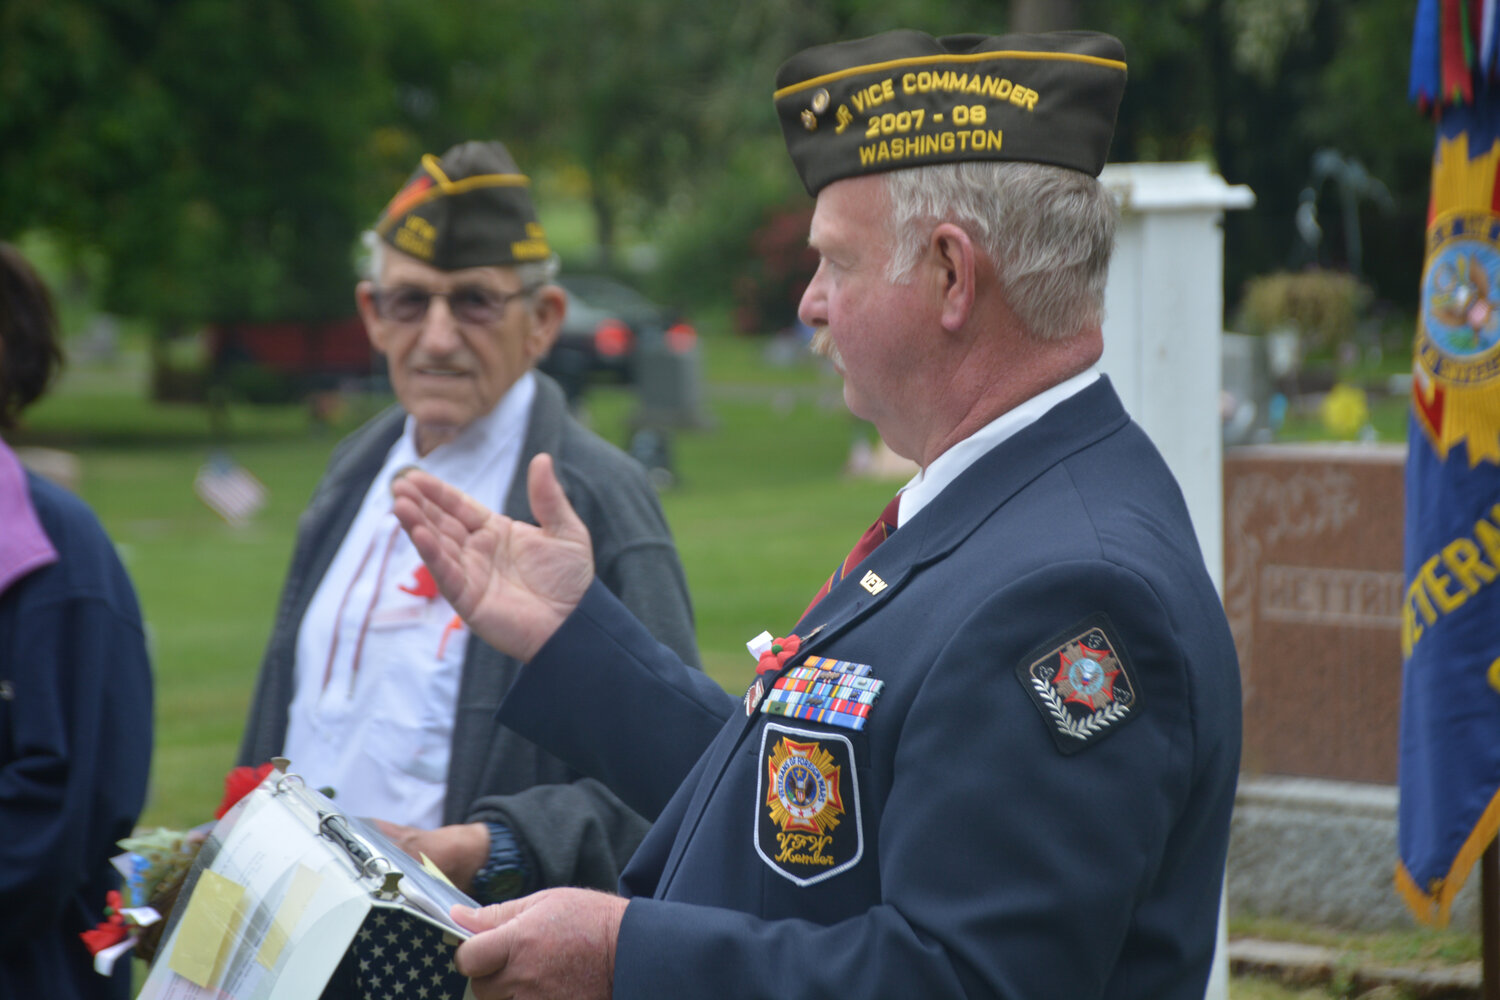 Steven Slater, with the VFW, leads the Memorial Day ceremony at the Yelm Cemetery on Monday, May 29.